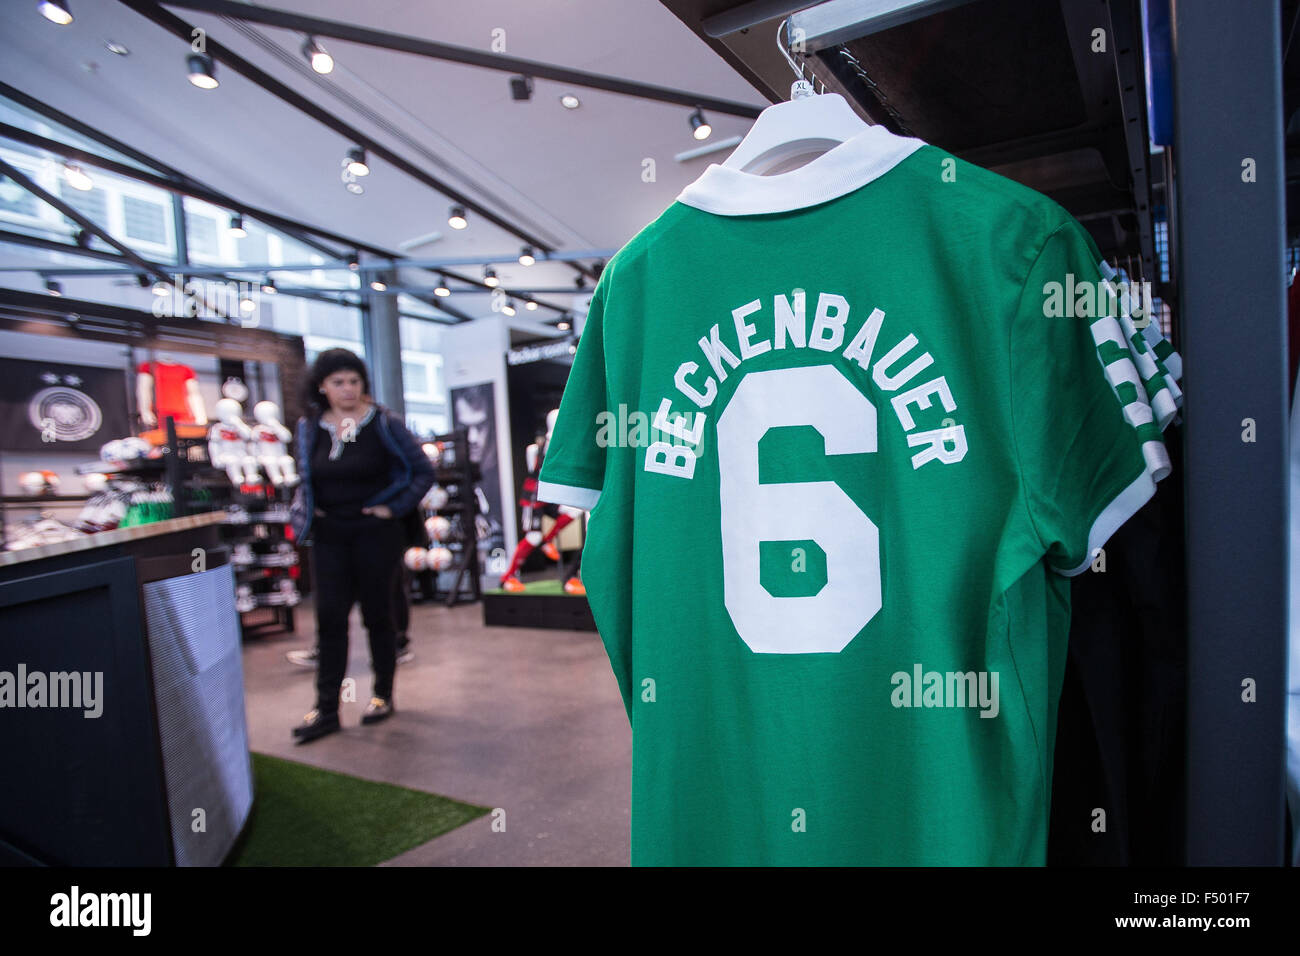 Dortmund, Germany. 25th Oct, 2015. A Beckenbauer shirt in the Adidas Store  at the newly opened Deutsches Fussballmuseum (German Football Museum) in  Dortmund, Germany, 25 October 2015. PHOTO: MAJA HITIJ/DPA/Alamy Live News